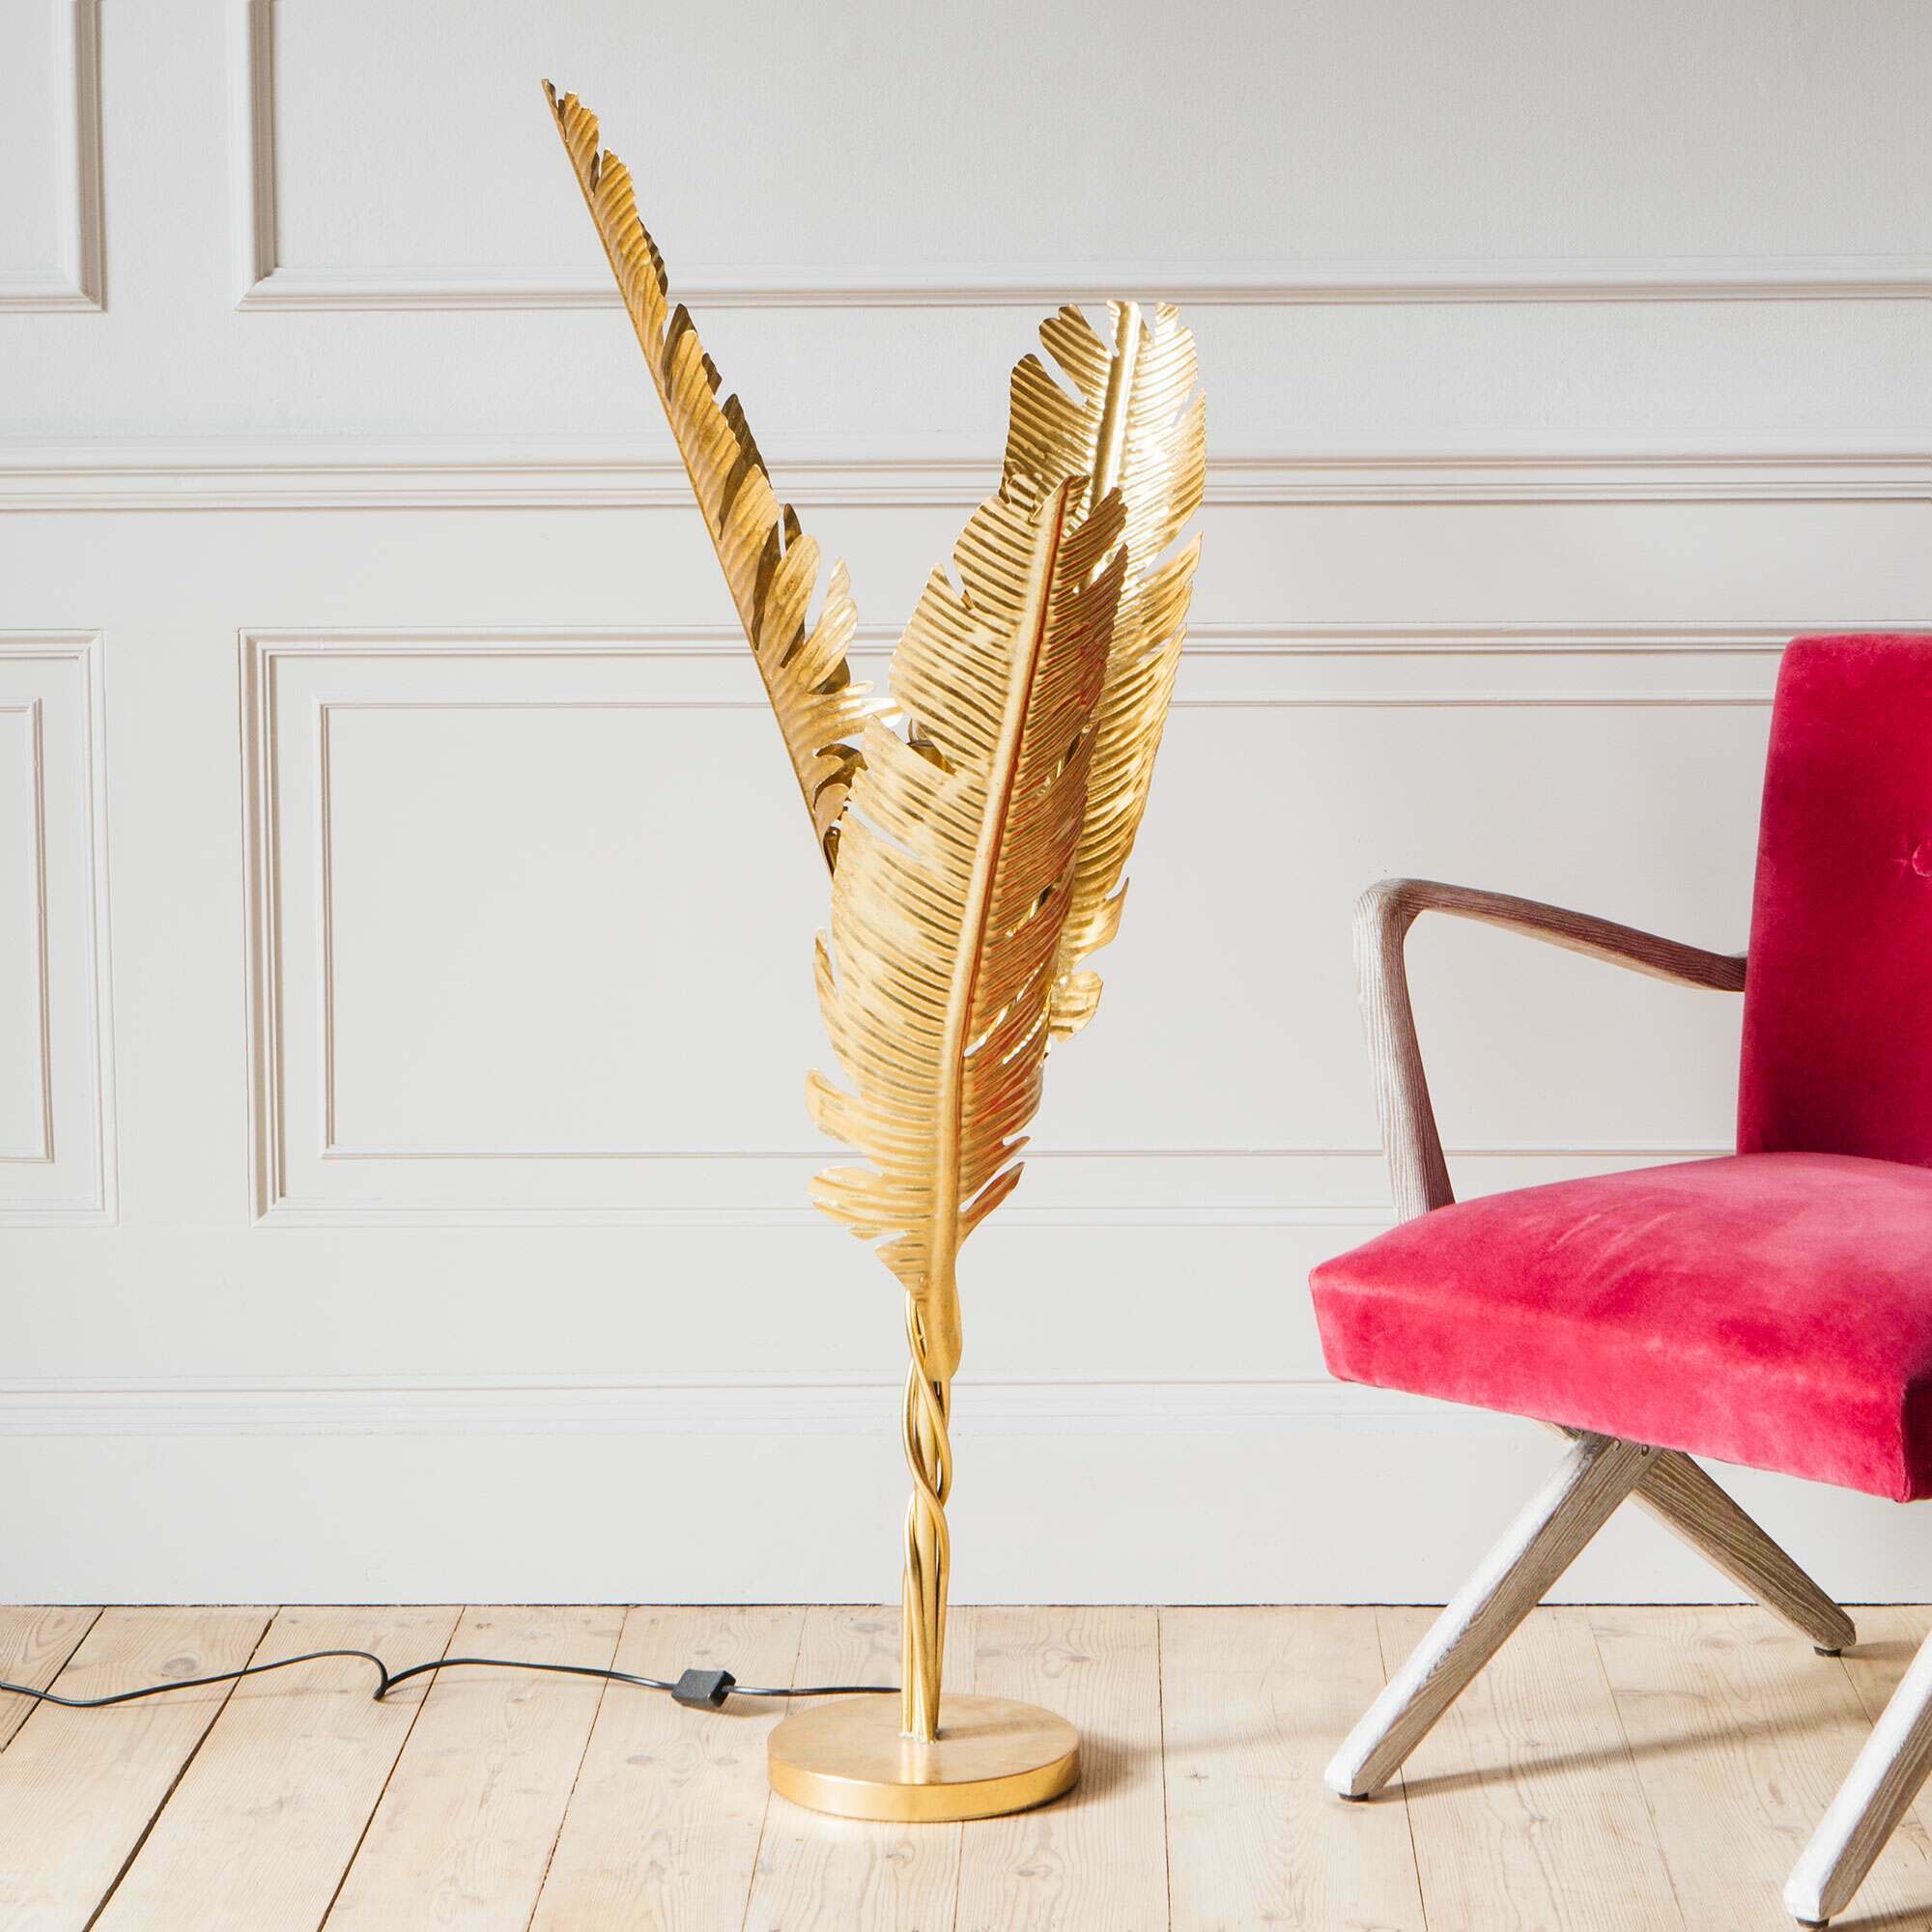 Read more about Graham and green small gold feather floor lamp